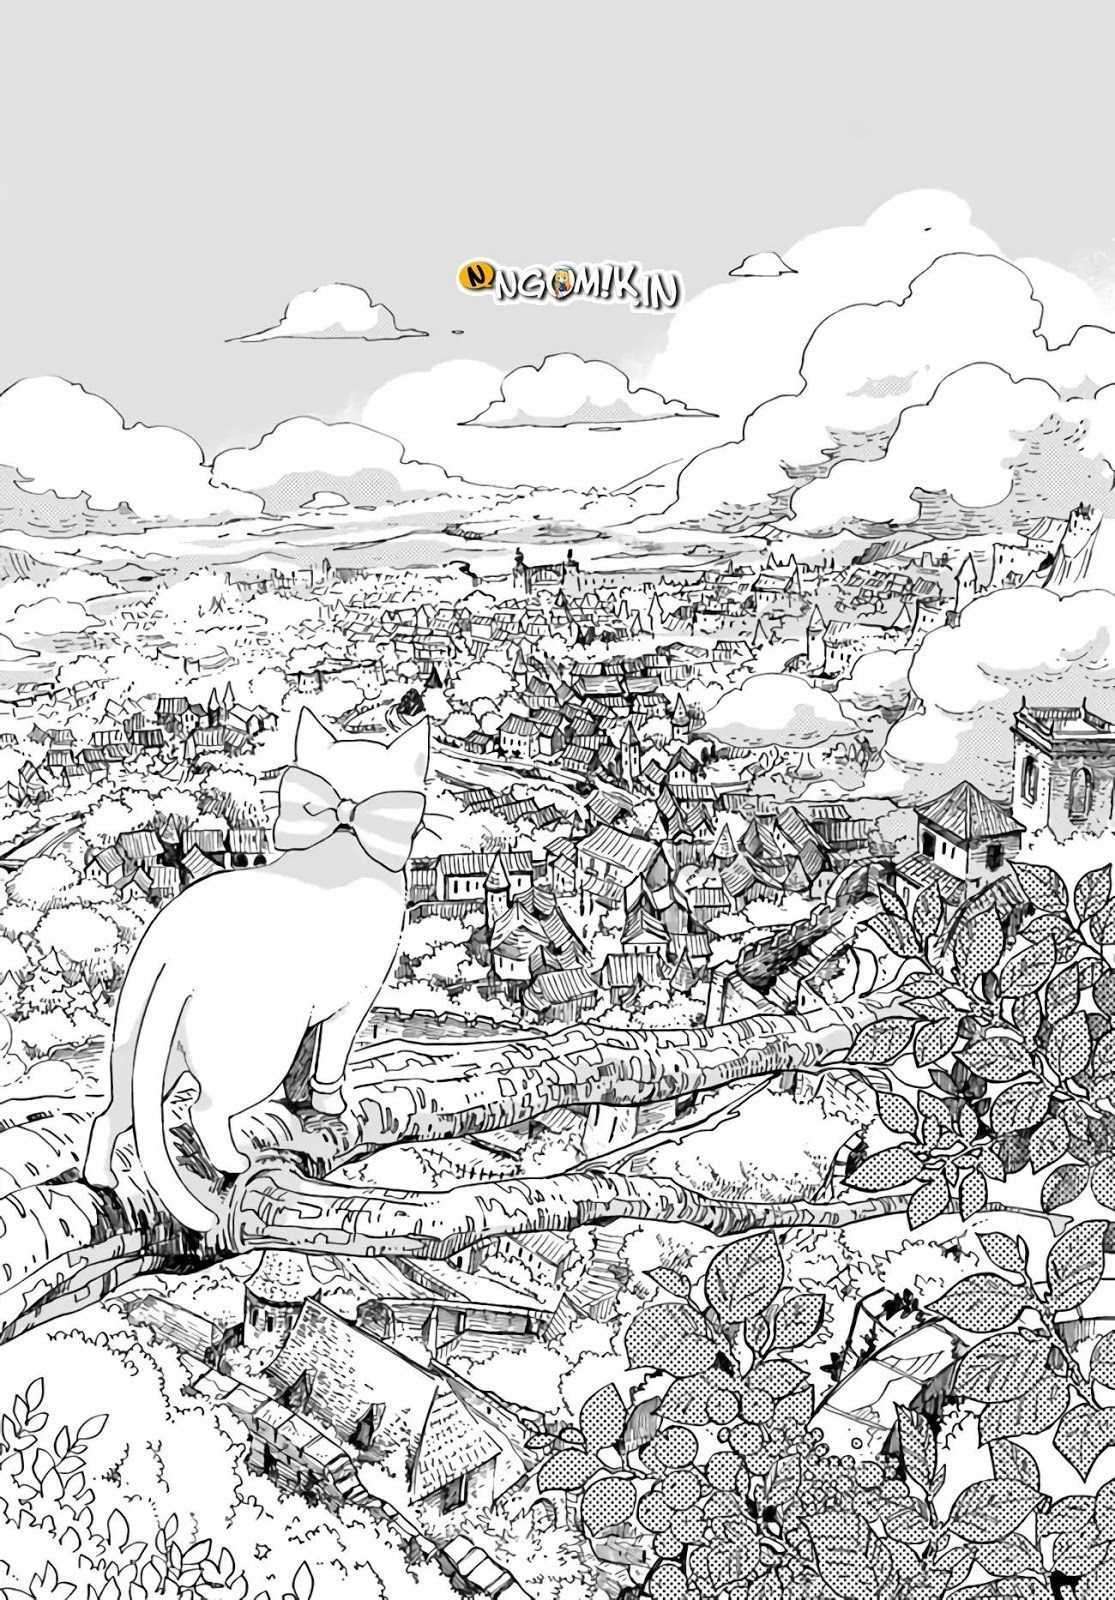 The Vengeful White Cat Lounging on the Dragon King’s Lap Chapter 09